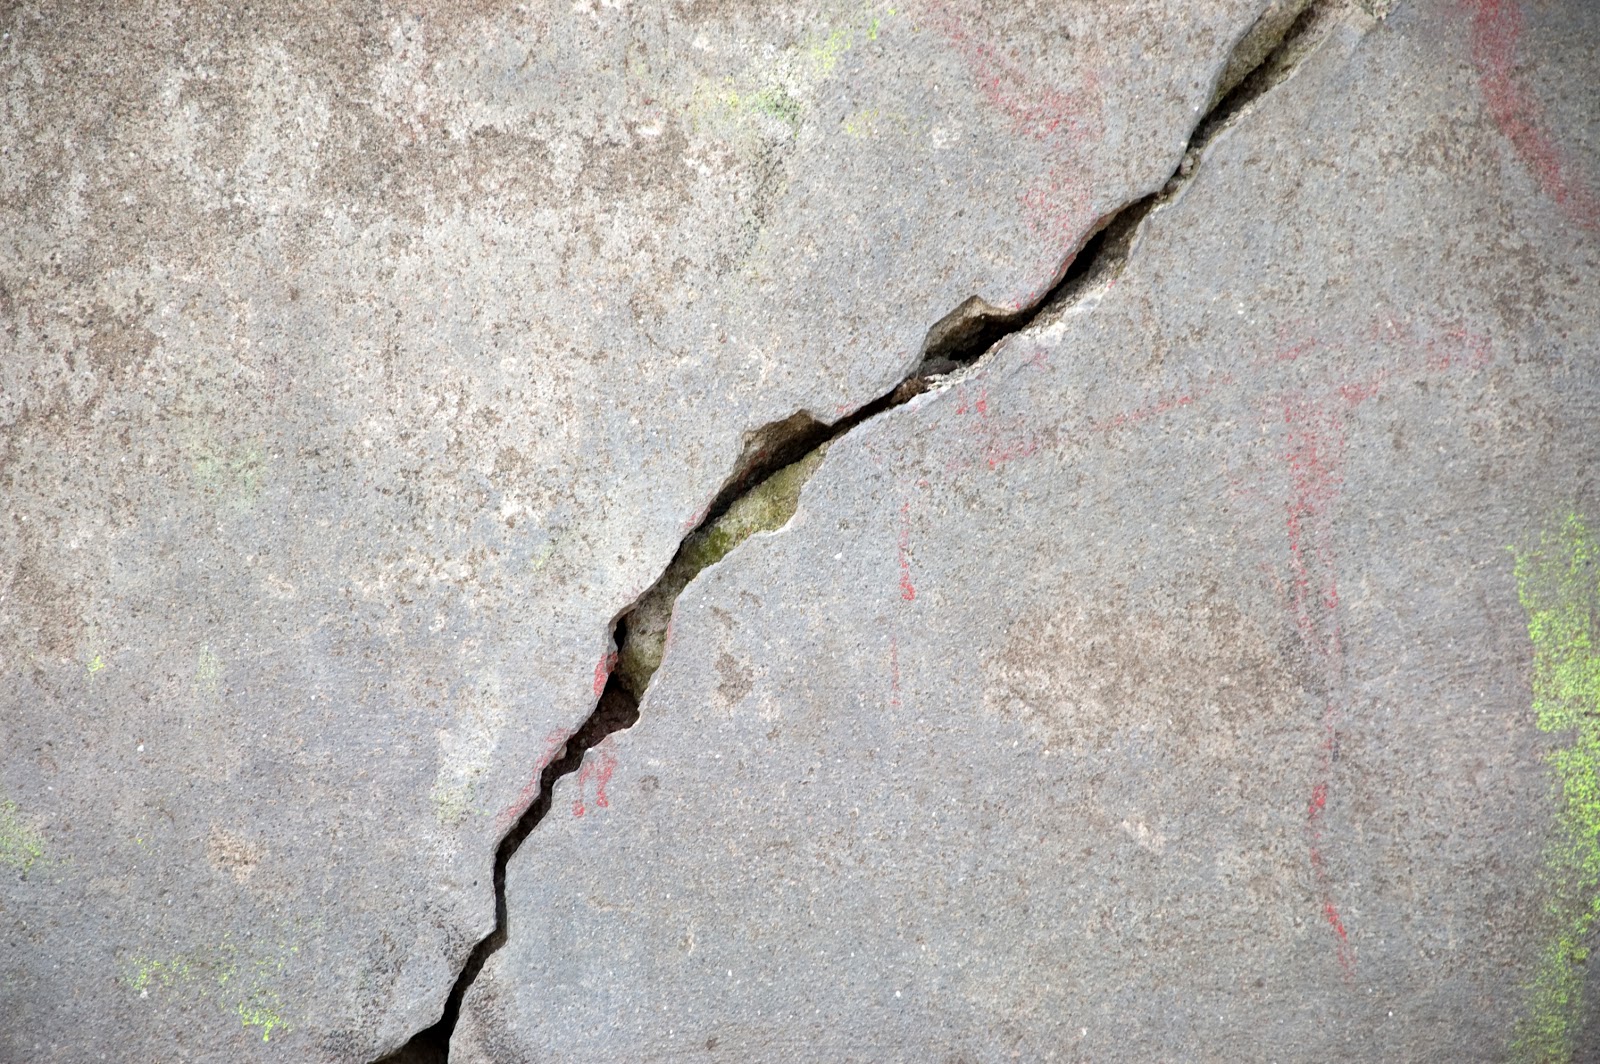 ... DEVOTIONAL: SURE UP YOUR FOUNDATION TO AVOID THE CRACKS IN THE WALL